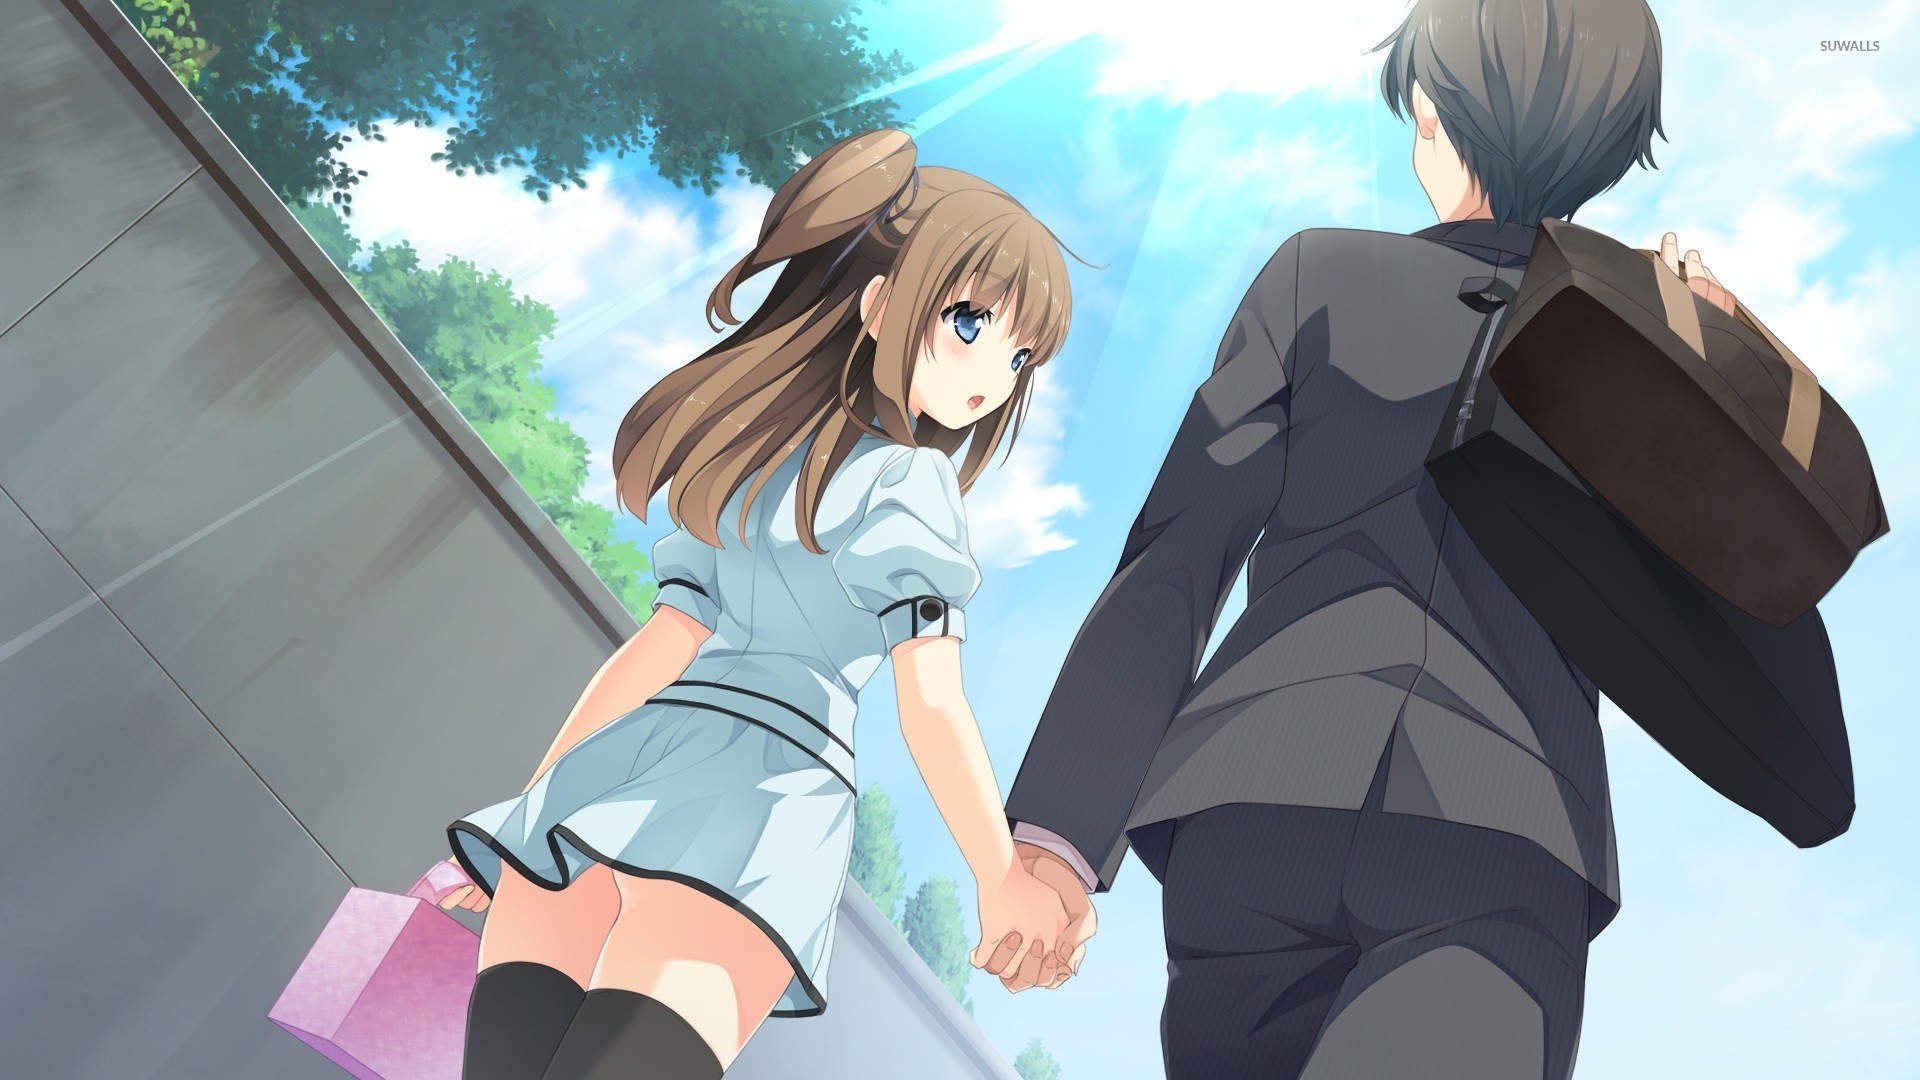 Couple holding hands wallpaper - Anime wallpapers - #41677